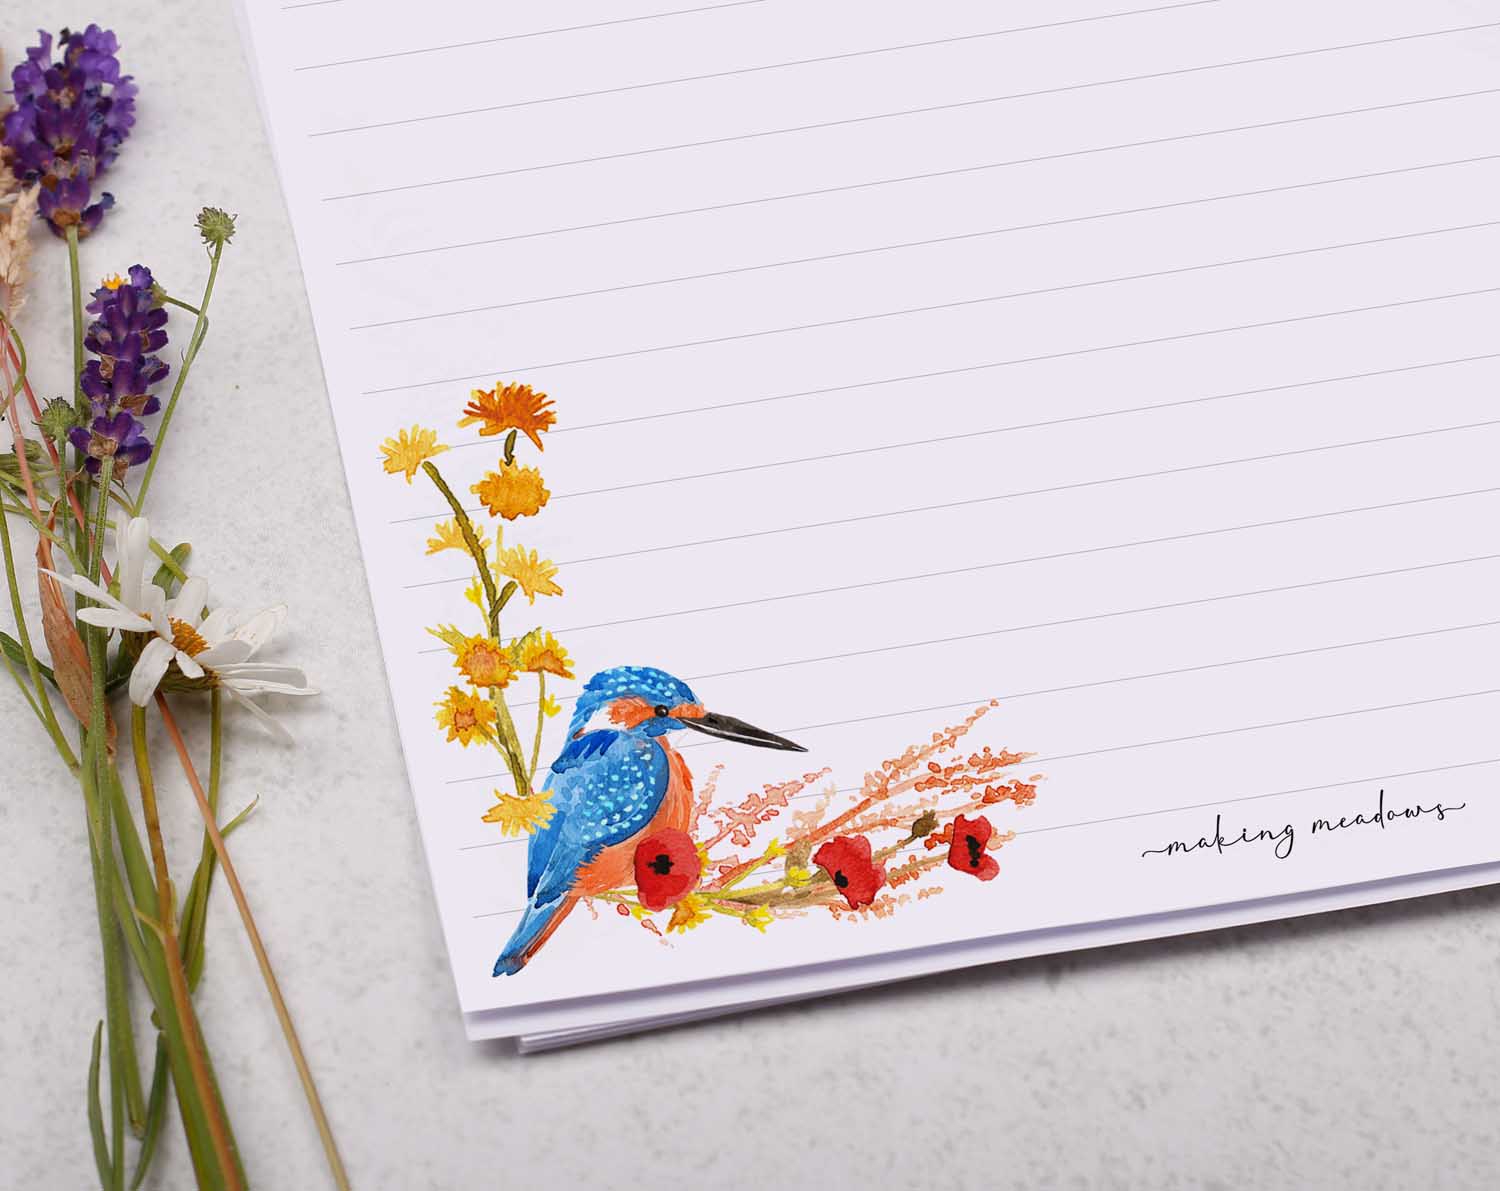 A4 letter writing paper sheets with a watercolour autumn flower border and 2 handsome kingfishers. A beautiful orange and red painted flower design